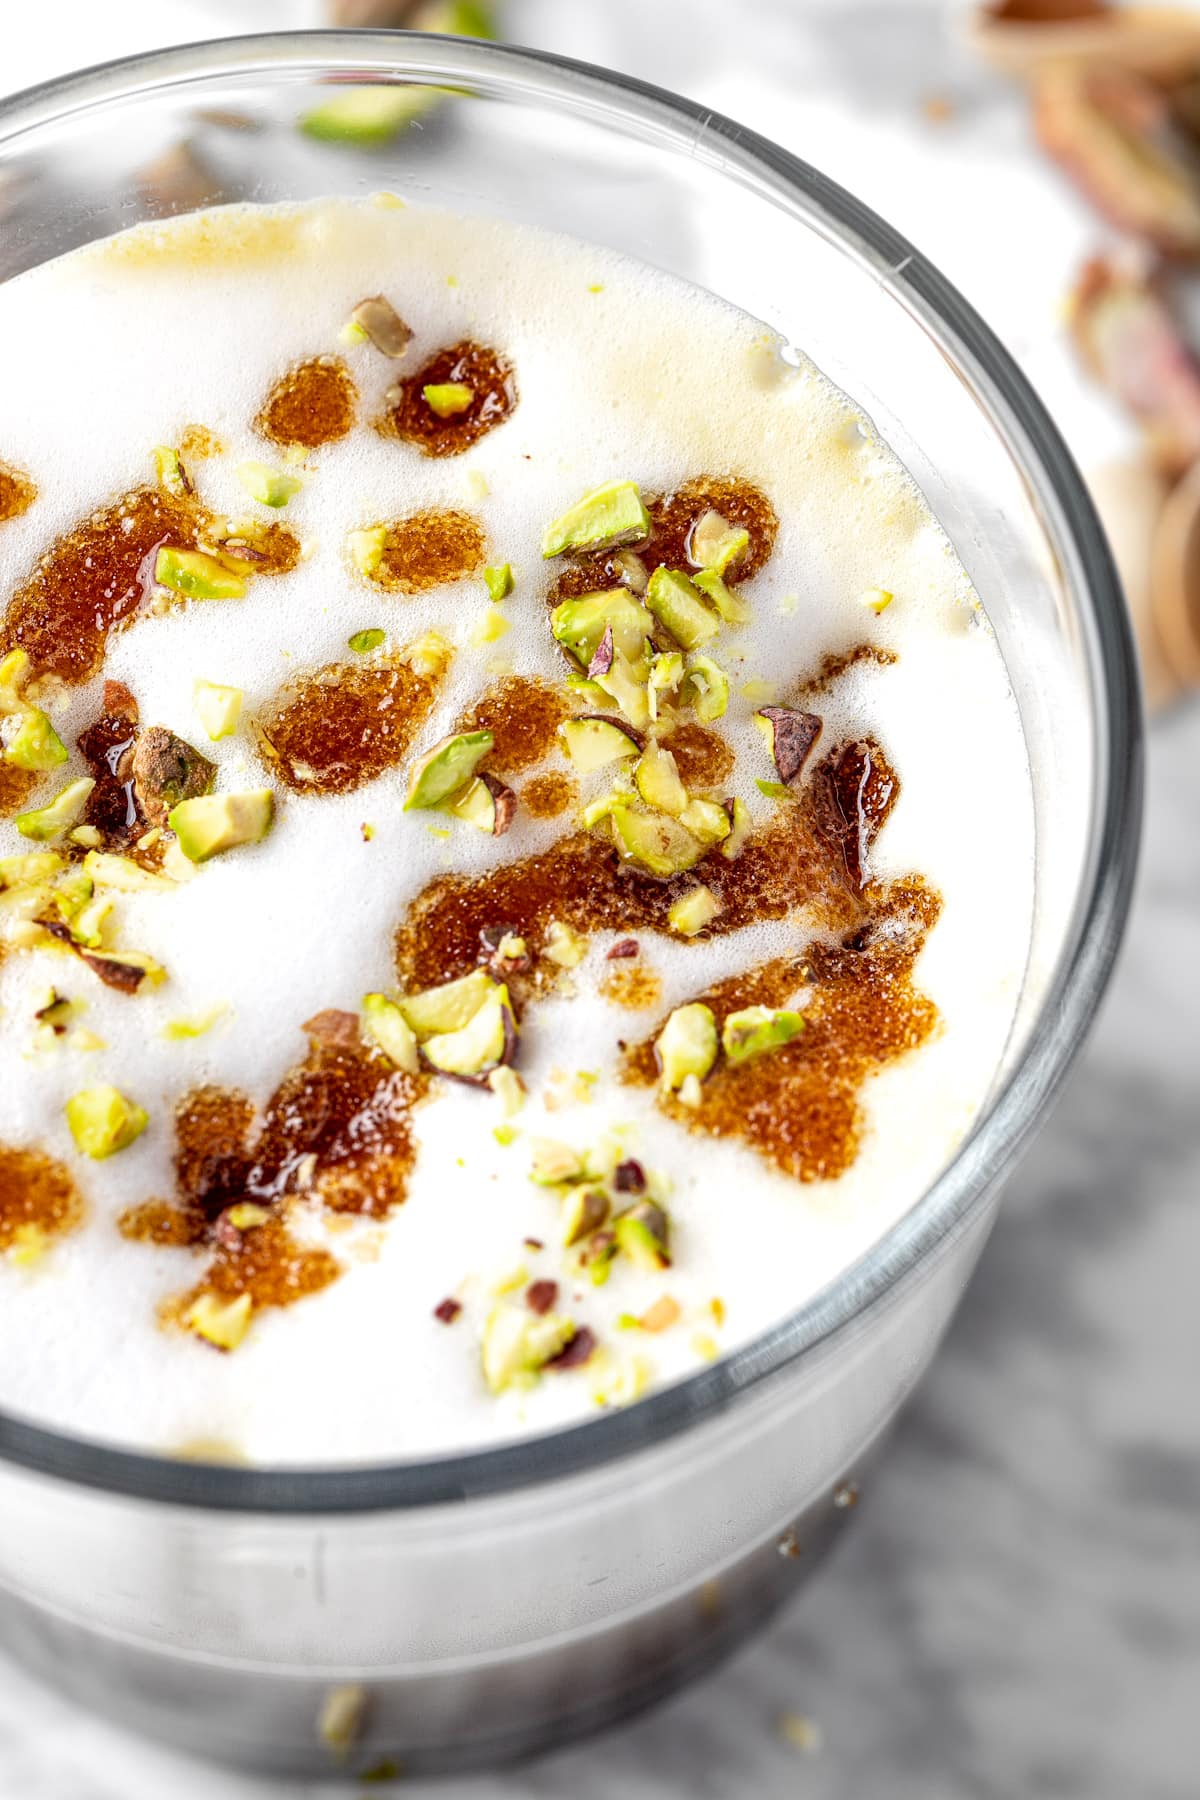 Up close view of a pistachio latte topped with milk foam, brown sugar topping and crushed, green pistachios.